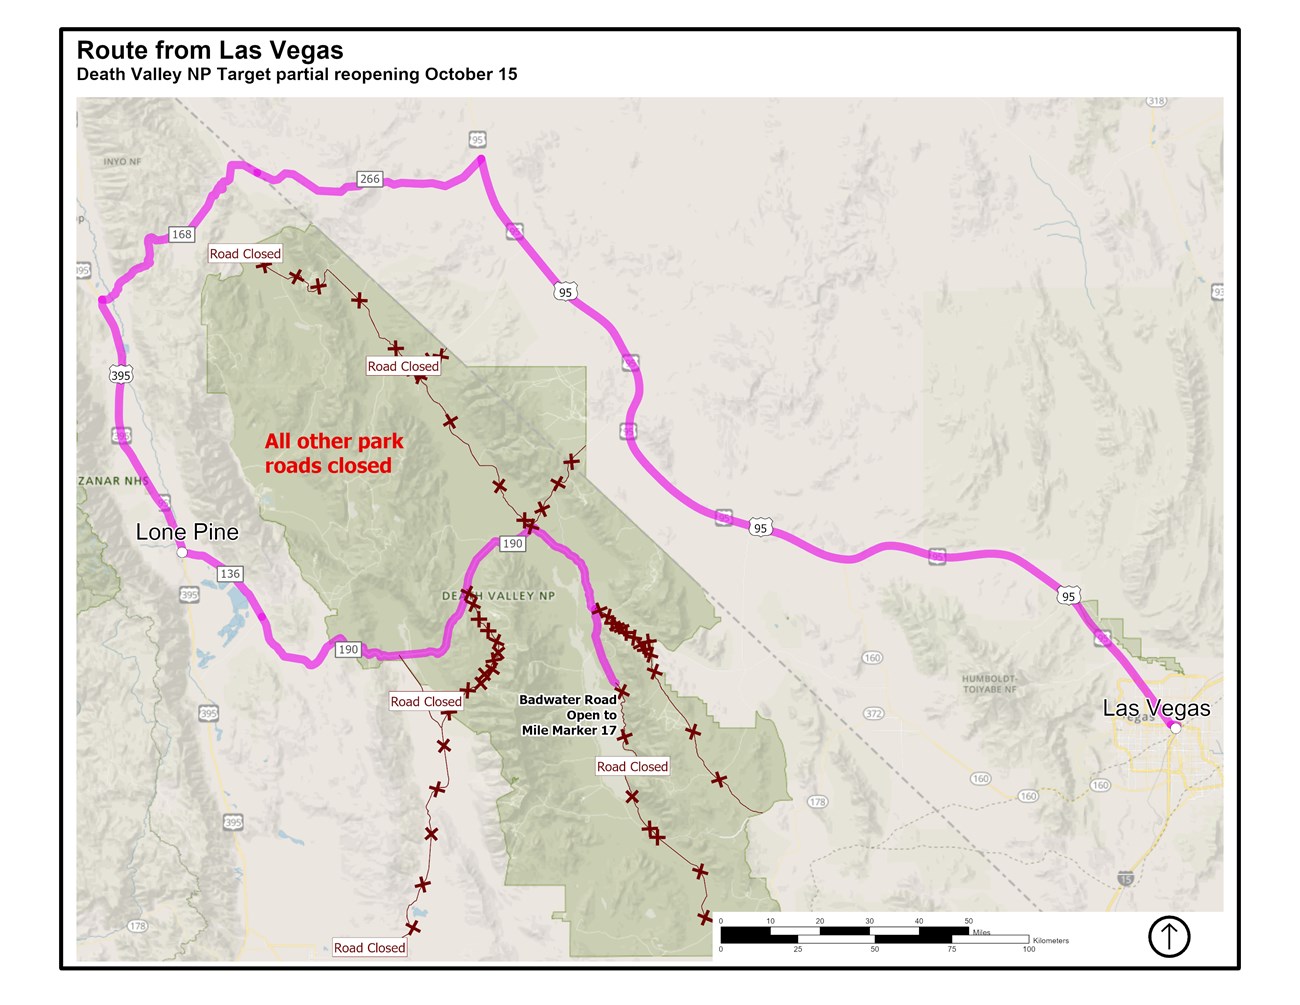 A map titled Route from Las Vegas, Death Valley NP Target partial reopening October 15. This map has a highlighted pink route from Las Vegas that leads north on highway 95 to highway 266 west to highway 168, then south on highway 395 to Lone Pine, CA.